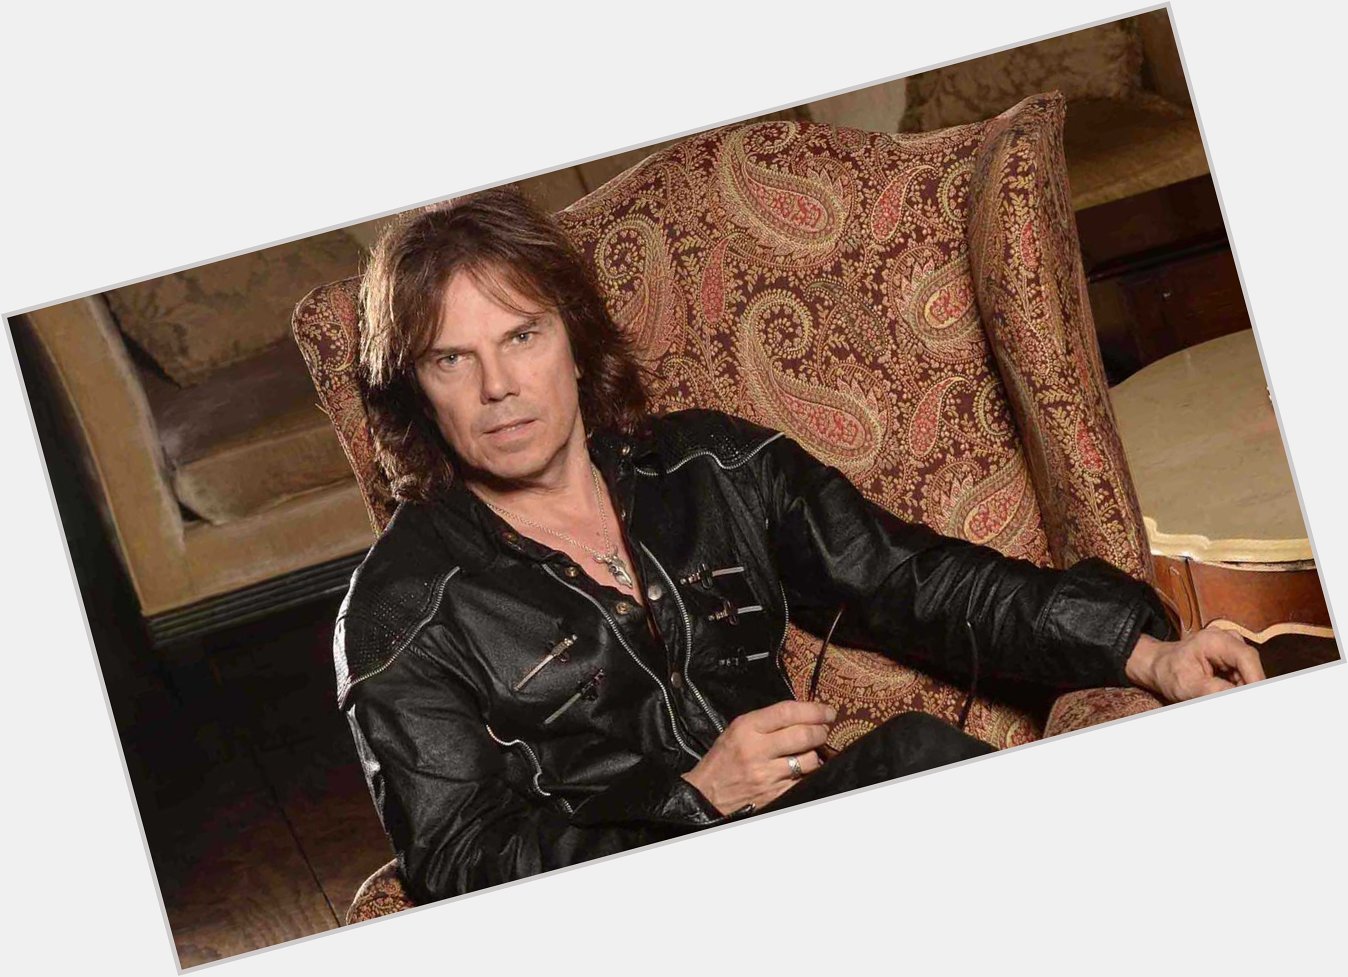 Happy 56th birthday to singer/songwriter Joey Tempest of Europe!  